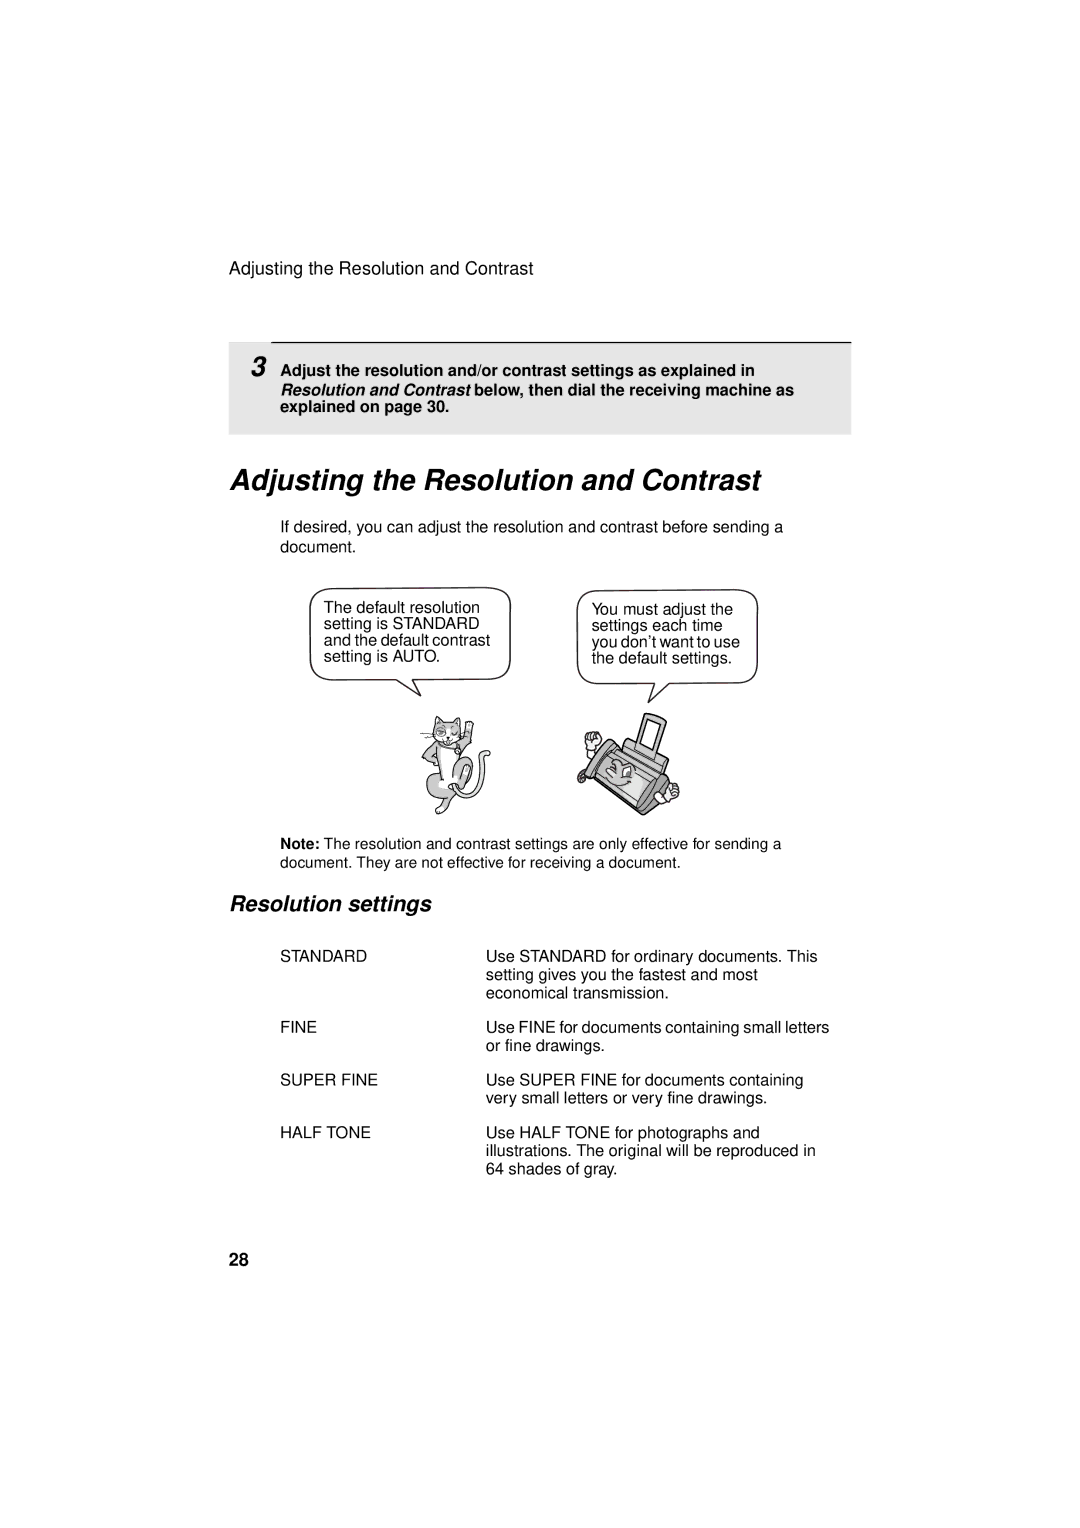 Sharp FO-P610/FO-P630 operation manual Adjusting the Resolution and Contrast, Resolution settings 